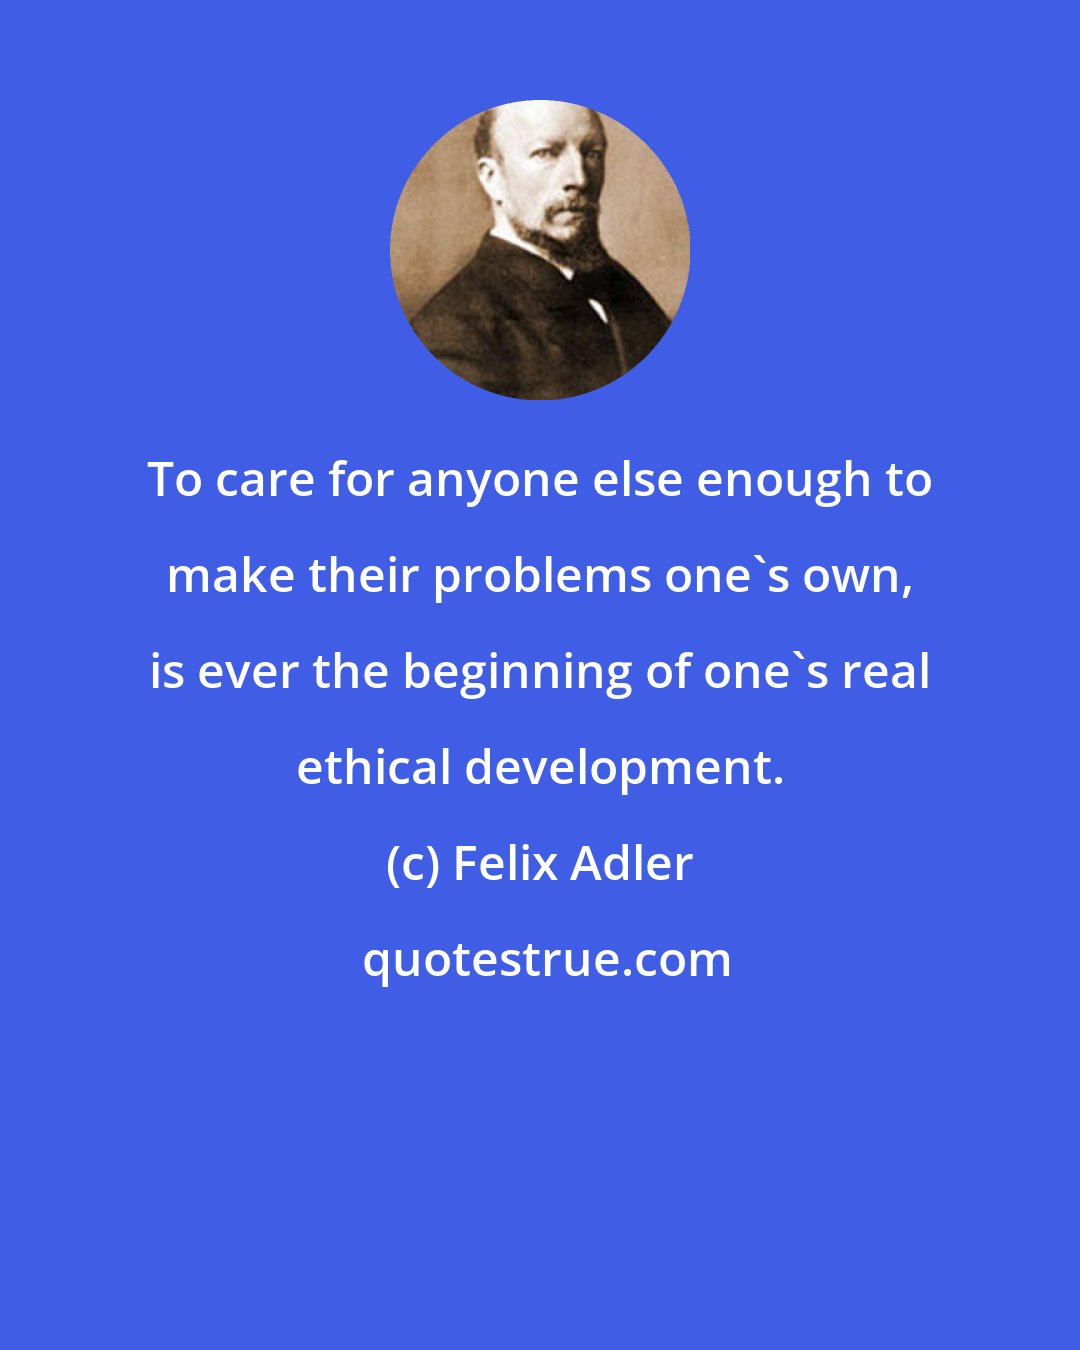 Felix Adler: To care for anyone else enough to make their problems one's own, is ever the beginning of one's real ethical development.